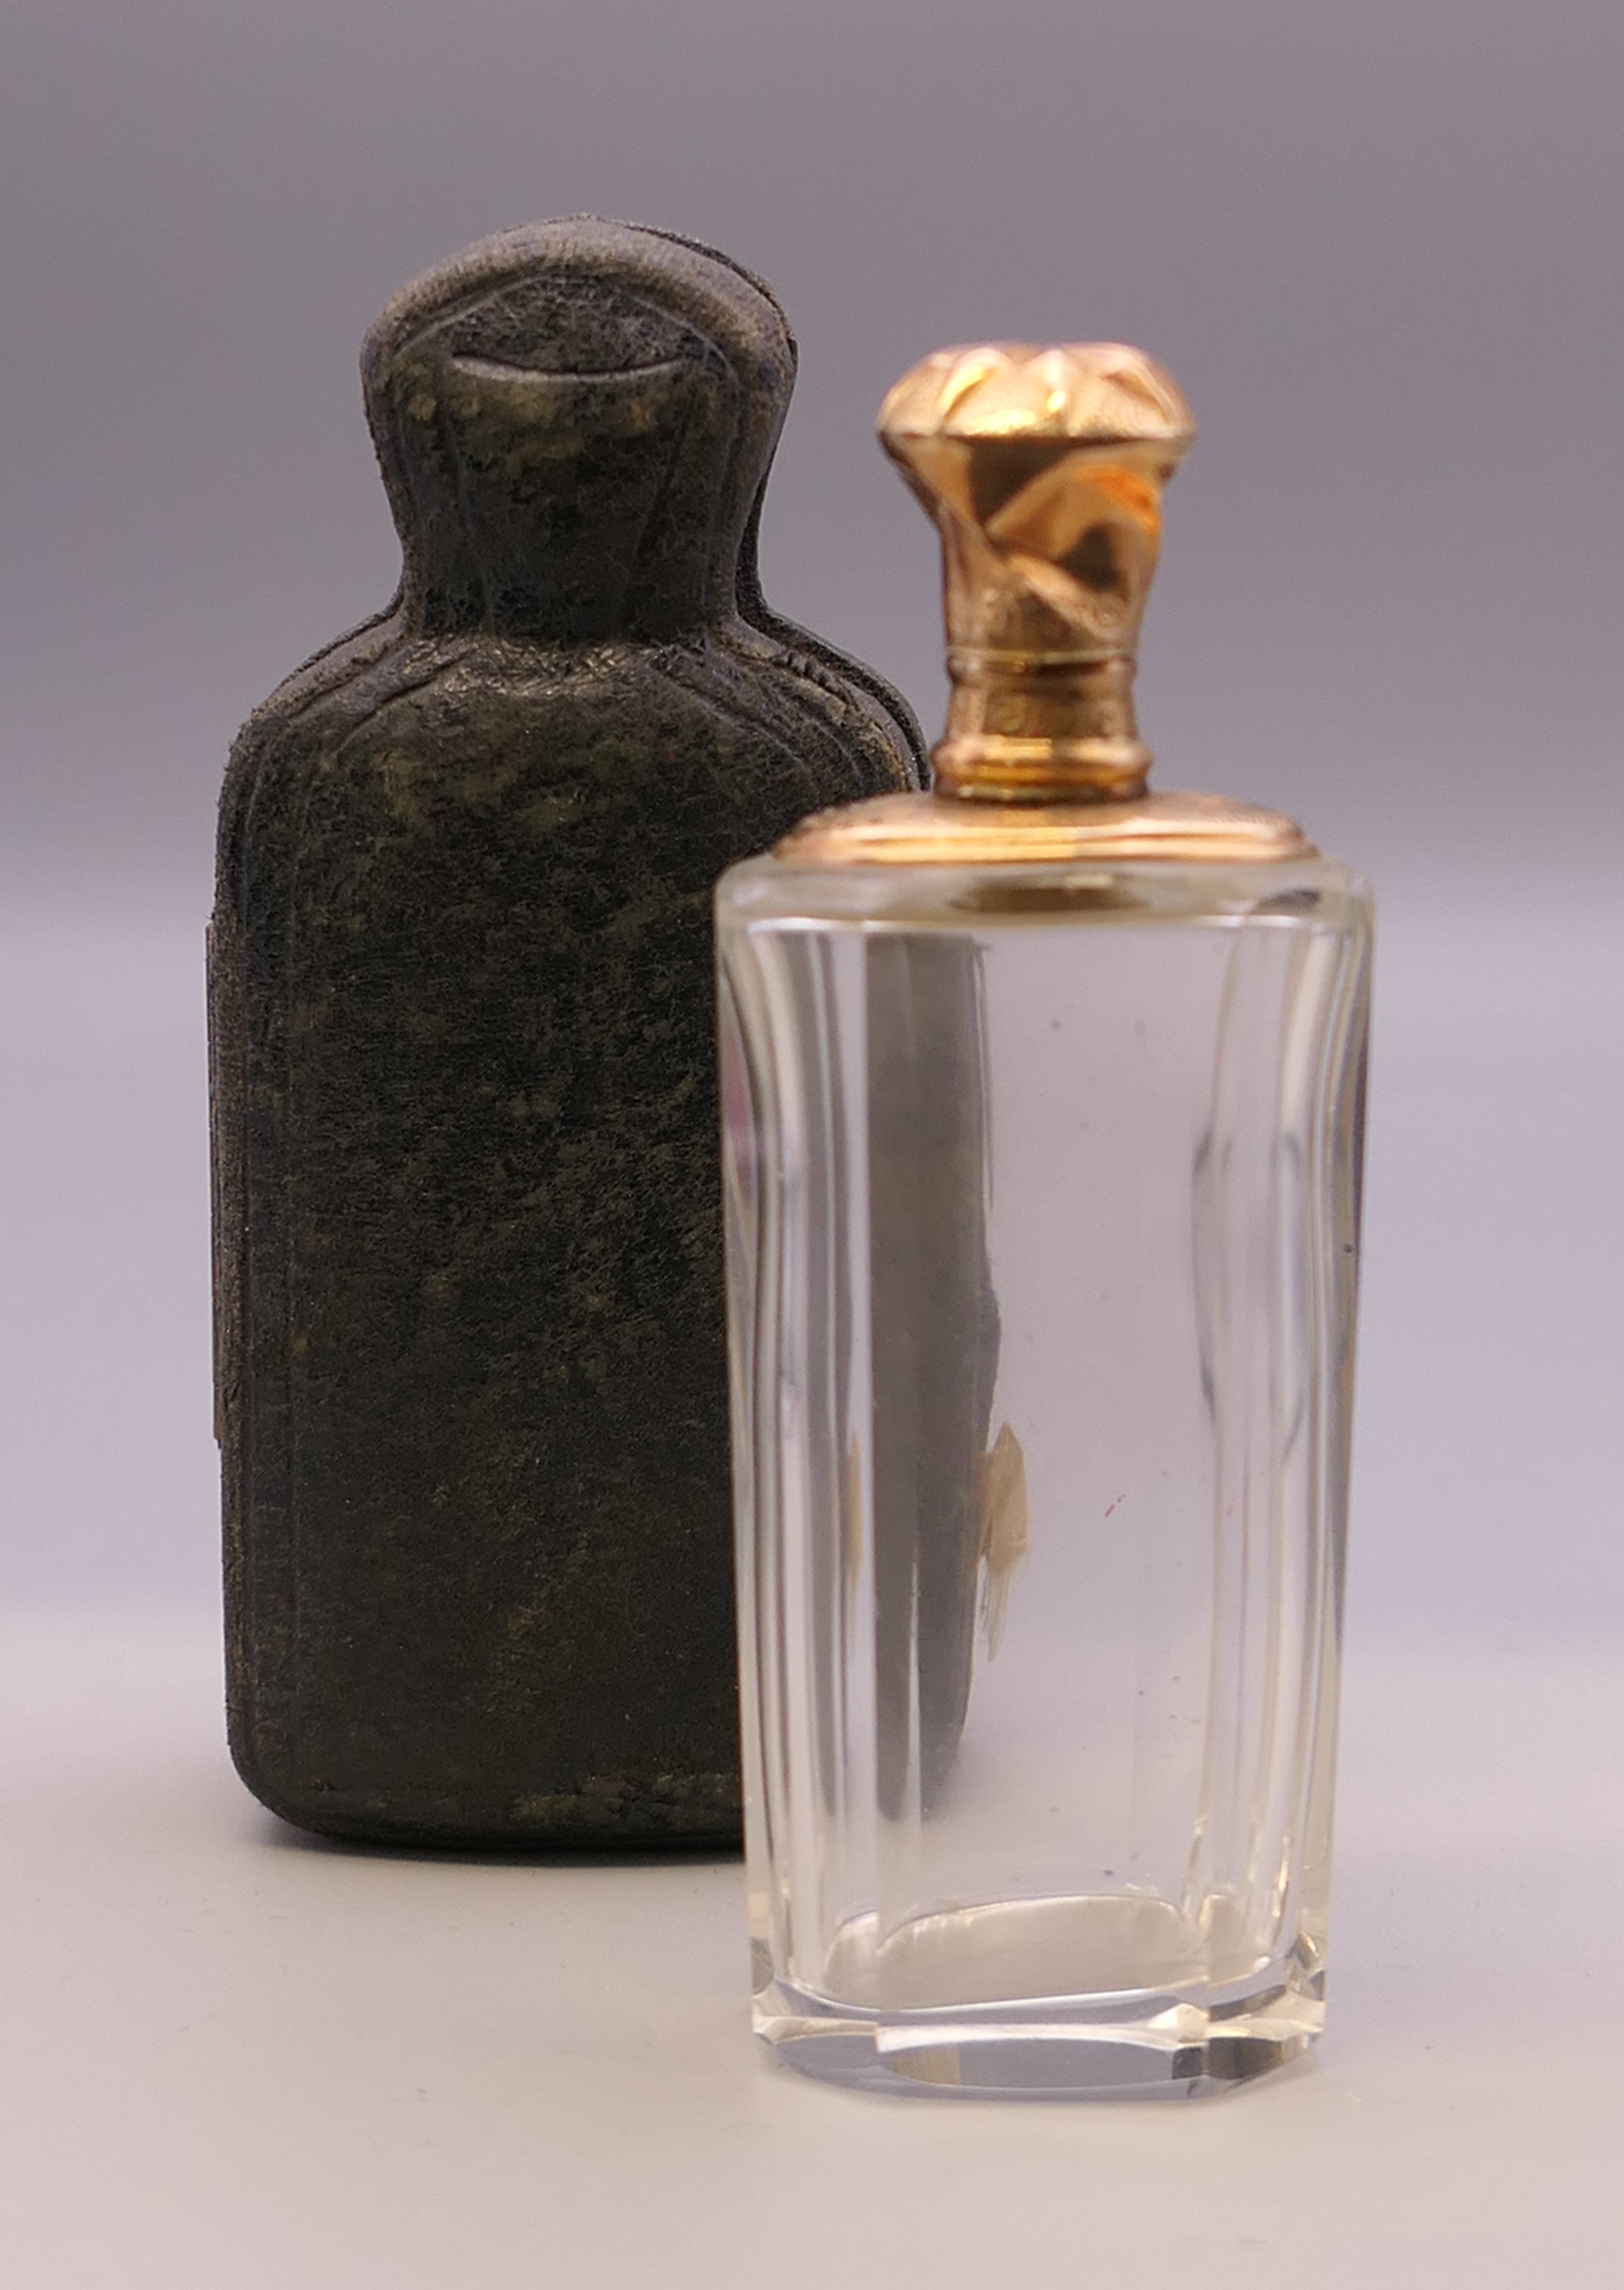 A cased Continental unmarked gold topped glass scent bottle. 9.5 cm high overall.